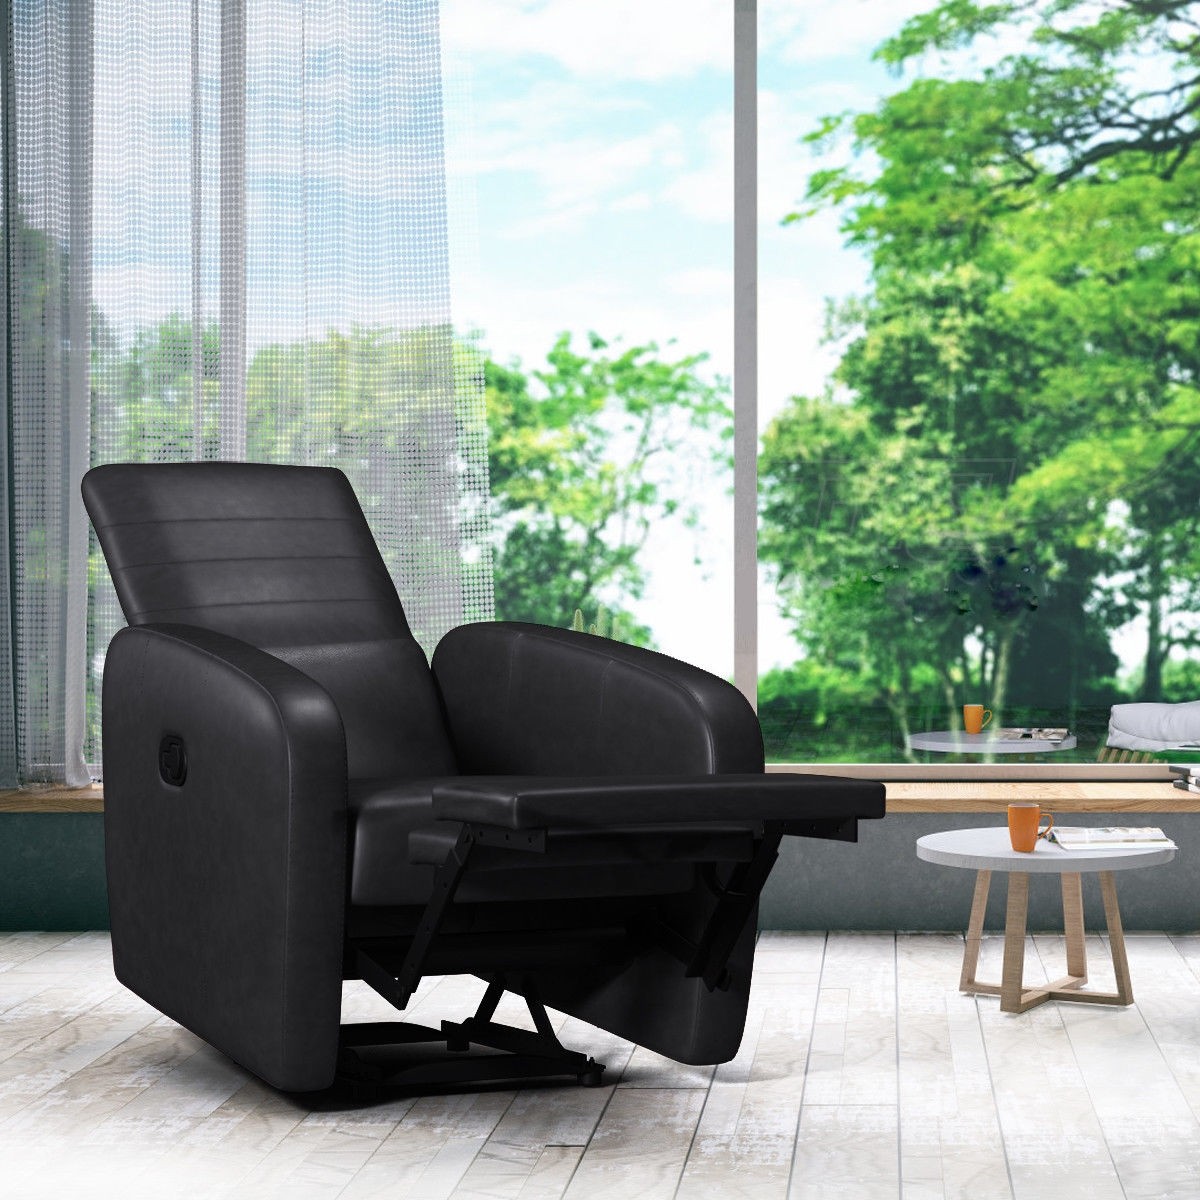 Contemporary Foldable-Back Leather Manual Recliner Sofa Chair